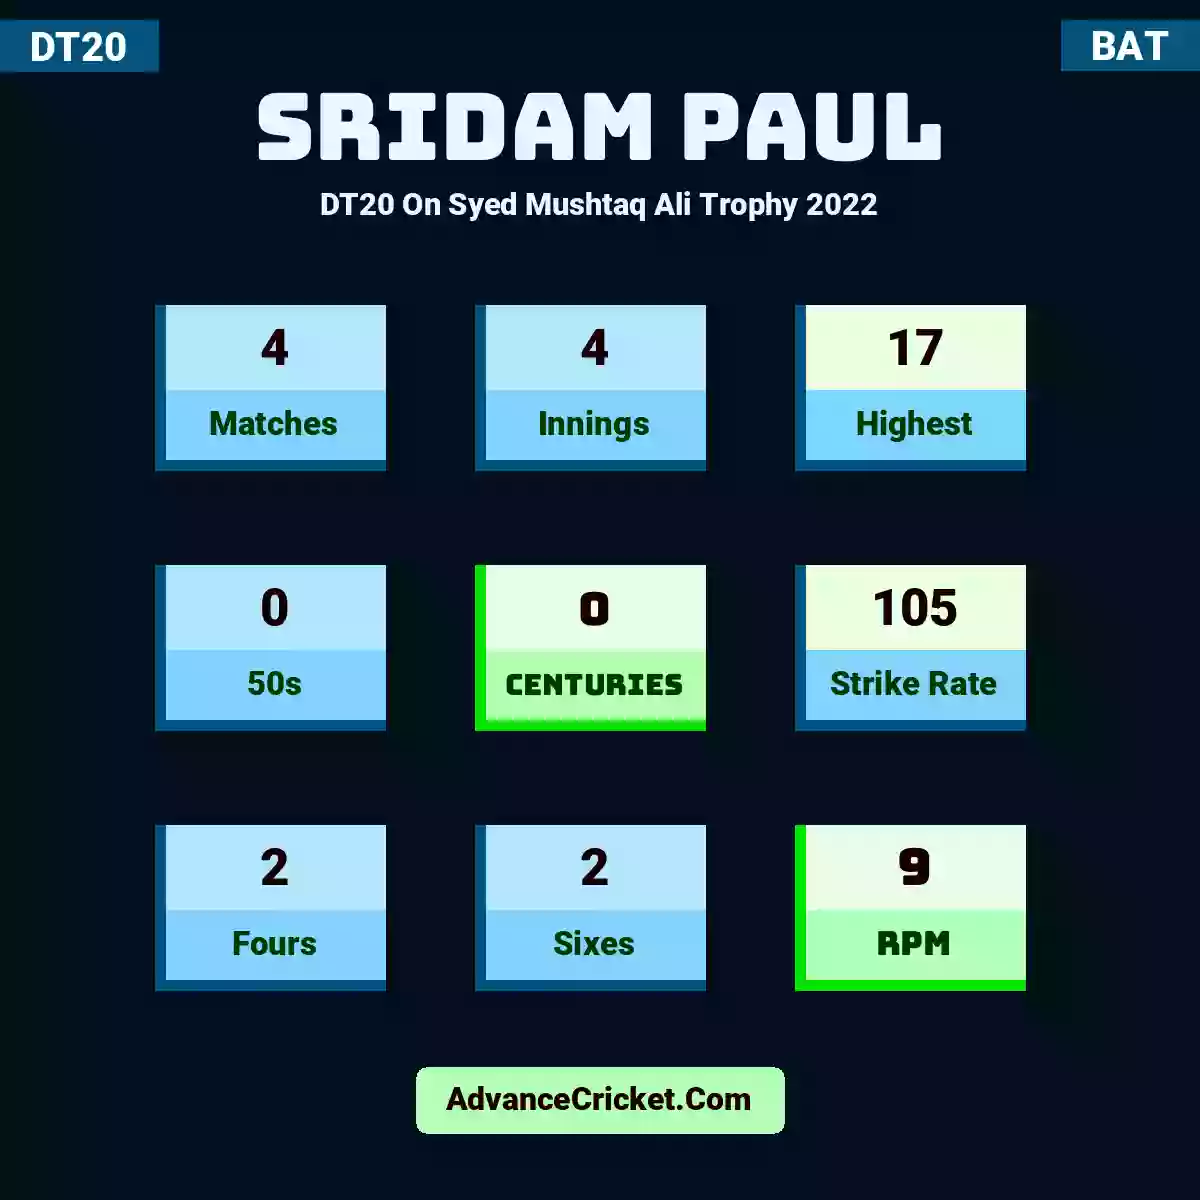 Sridam Paul DT20  On Syed Mushtaq Ali Trophy 2022, Sridam Paul played 4 matches, scored 17 runs as highest, 0 half-centuries, and 0 centuries, with a strike rate of 105. S.Paul hit 2 fours and 2 sixes, with an RPM of 9.